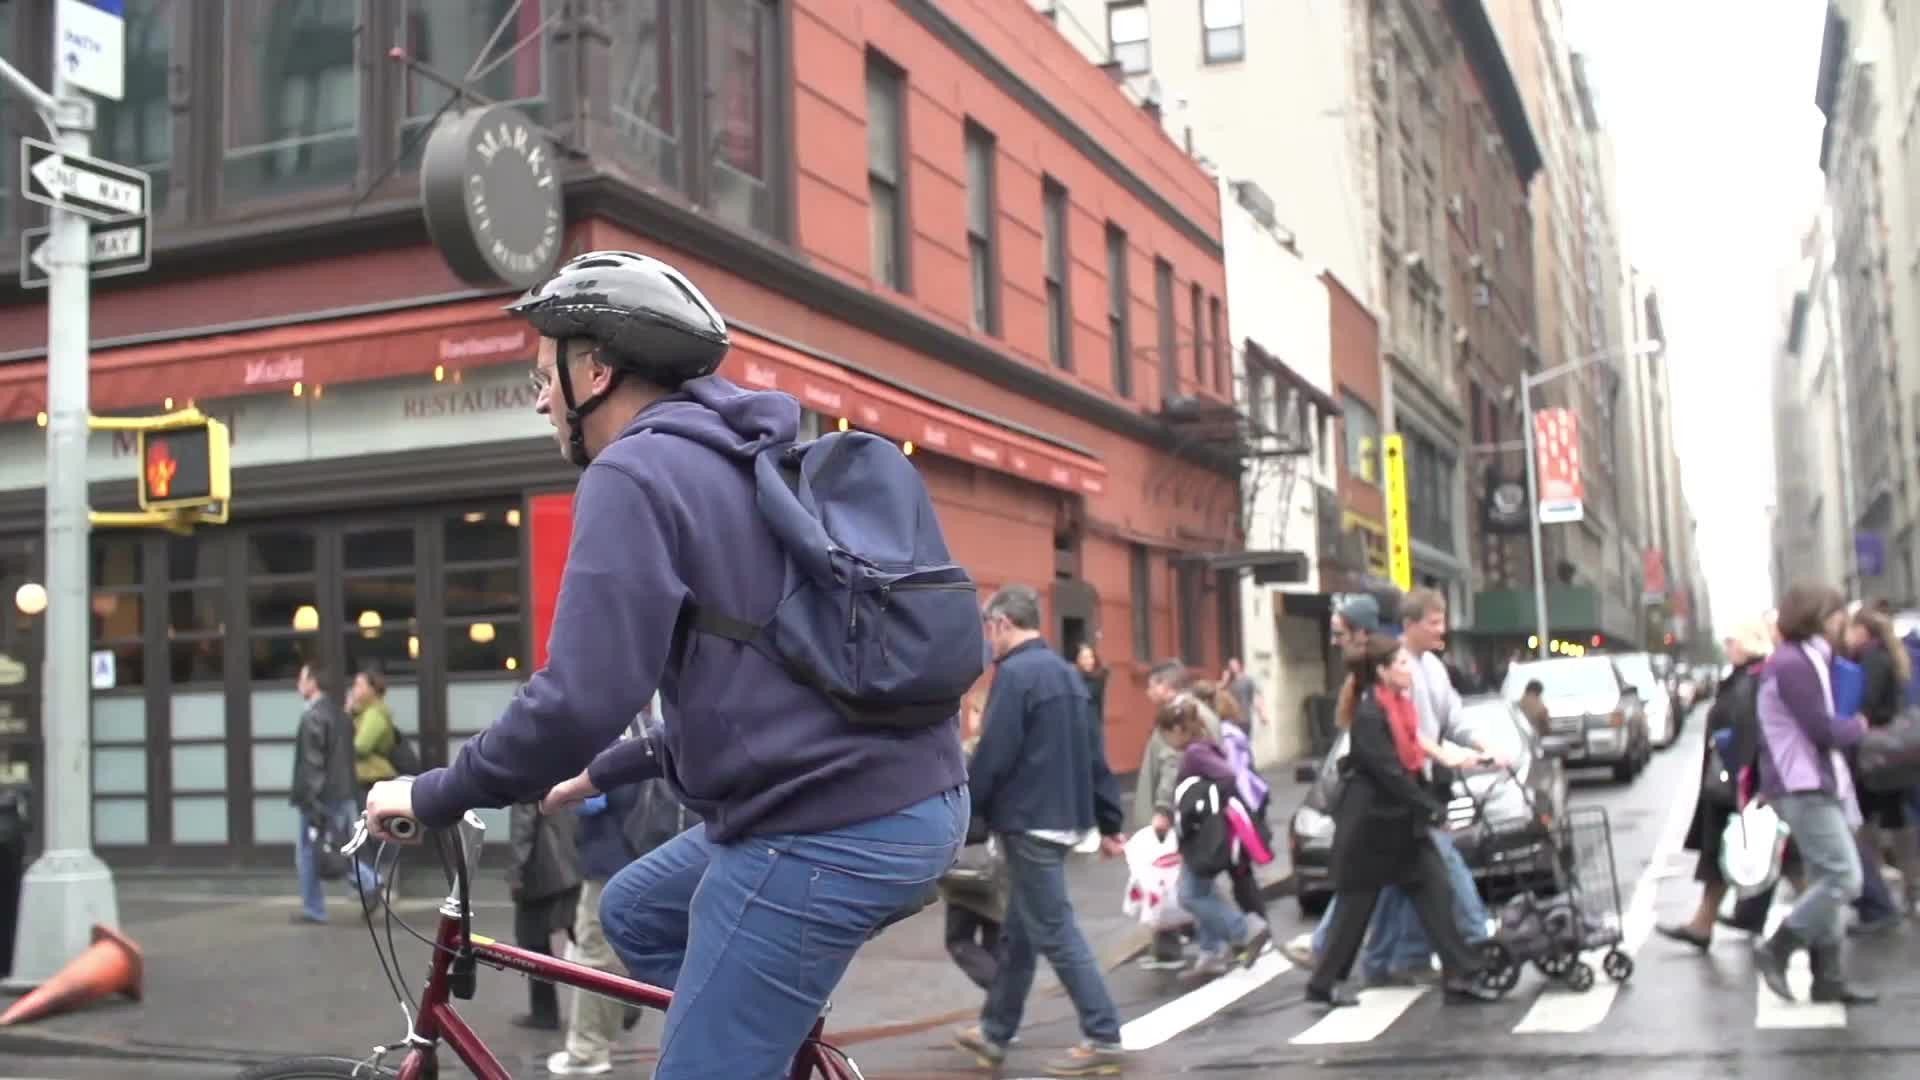 man on bicycle with helmet on fall day - 6th avenue in NYC